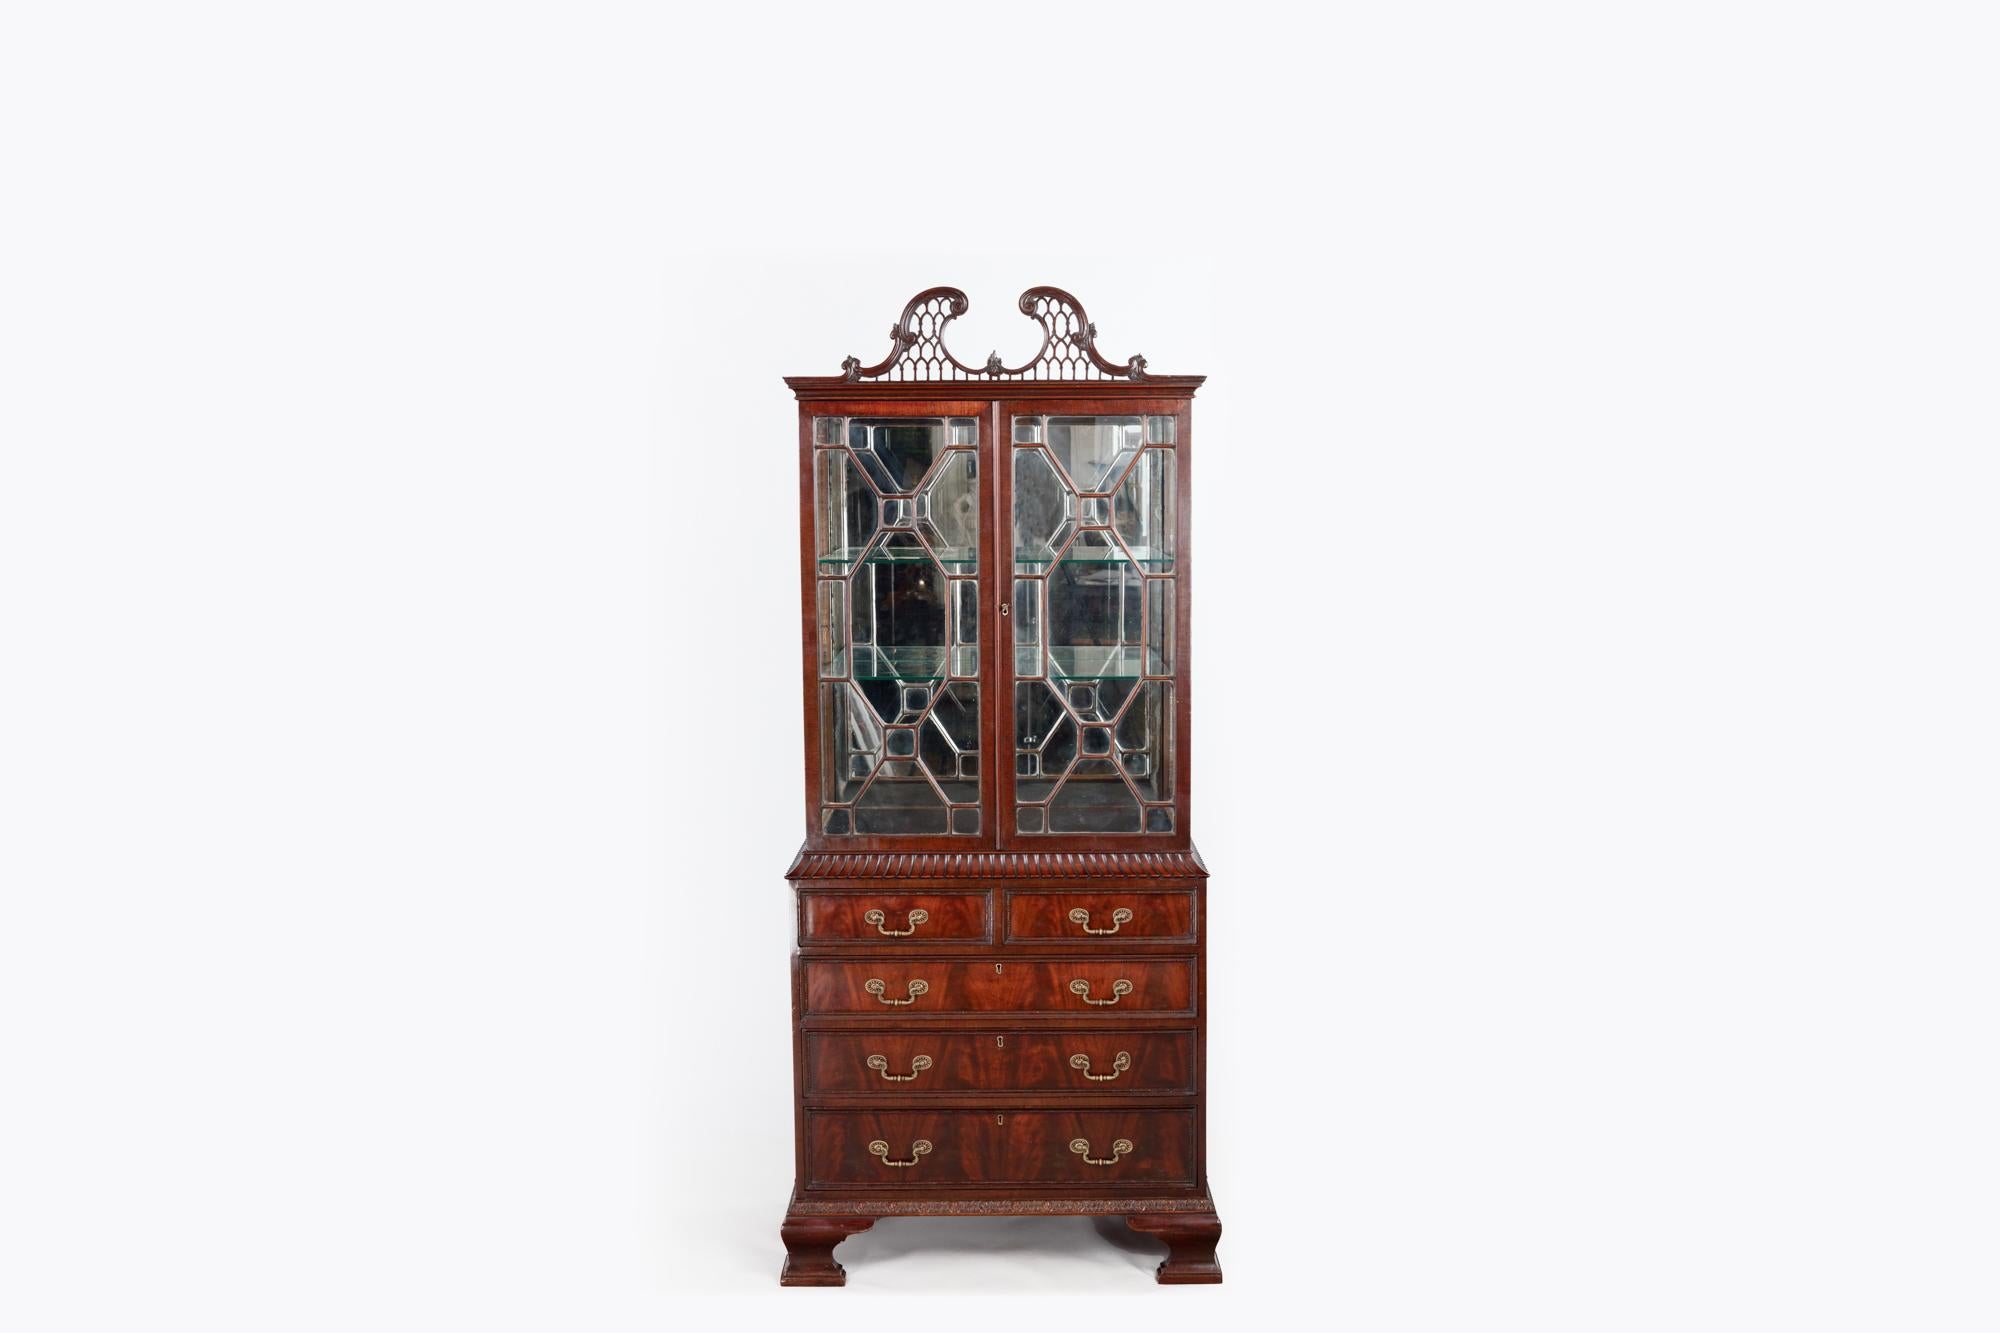 Early 19th Century two-door Chippendale display case in the Chinese style. The finely carved swan neck pediment with open fretwork design sits above two astragal glazed doors that open to reveal a mirror-backed interior. To the lower section, with